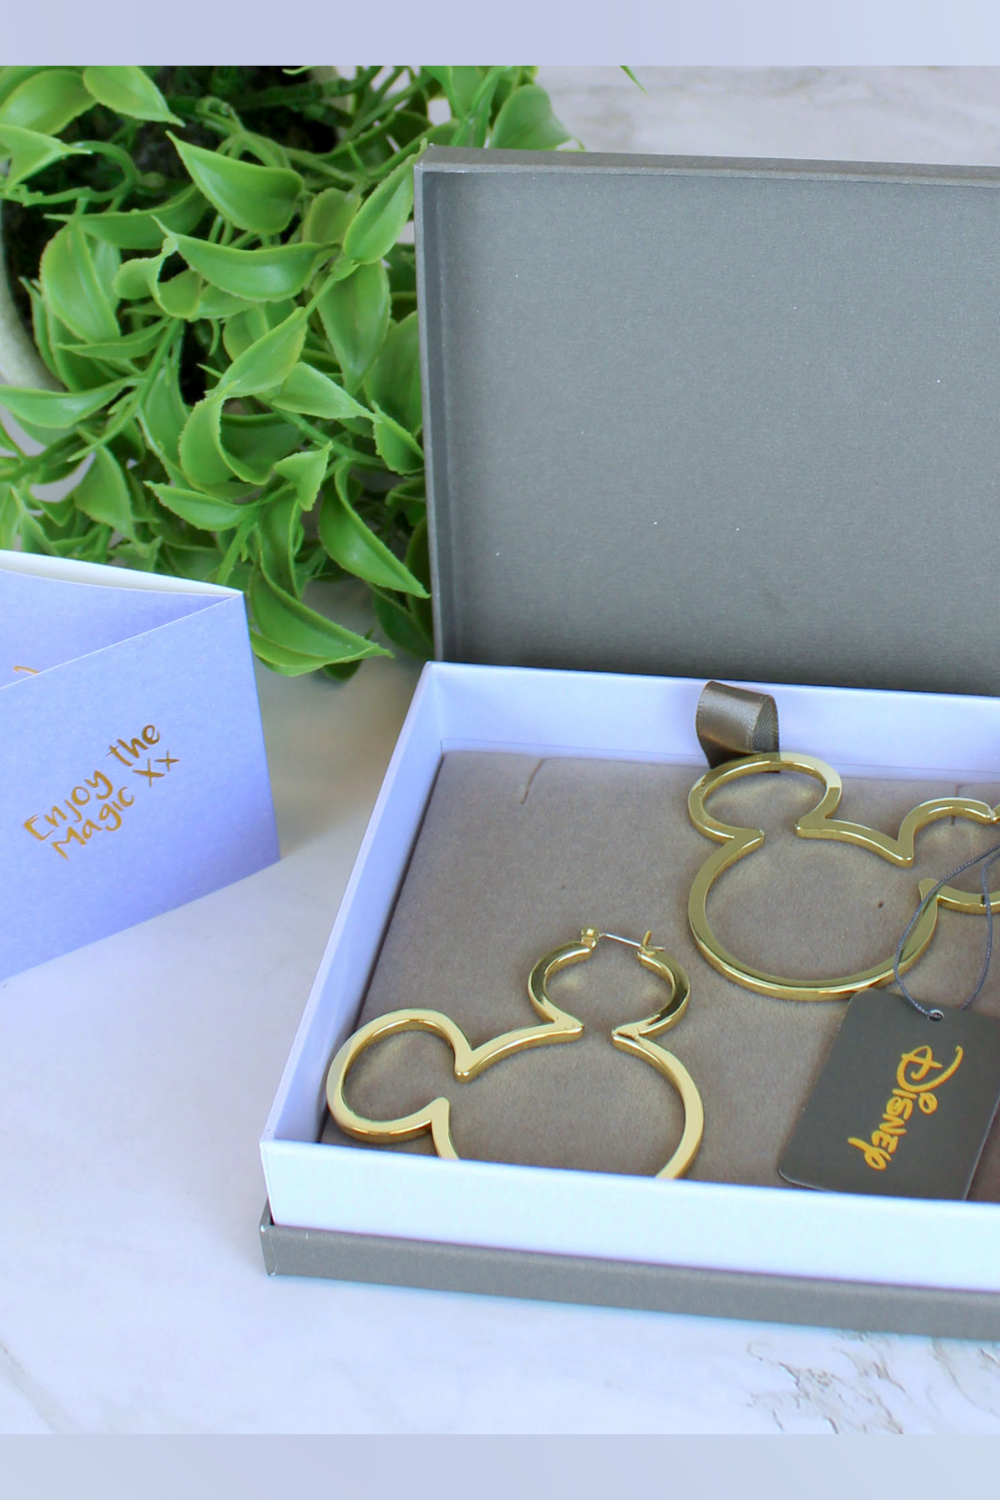 Mickey Mouse Outline Disney Couture Gold Plated Hoop Earrings